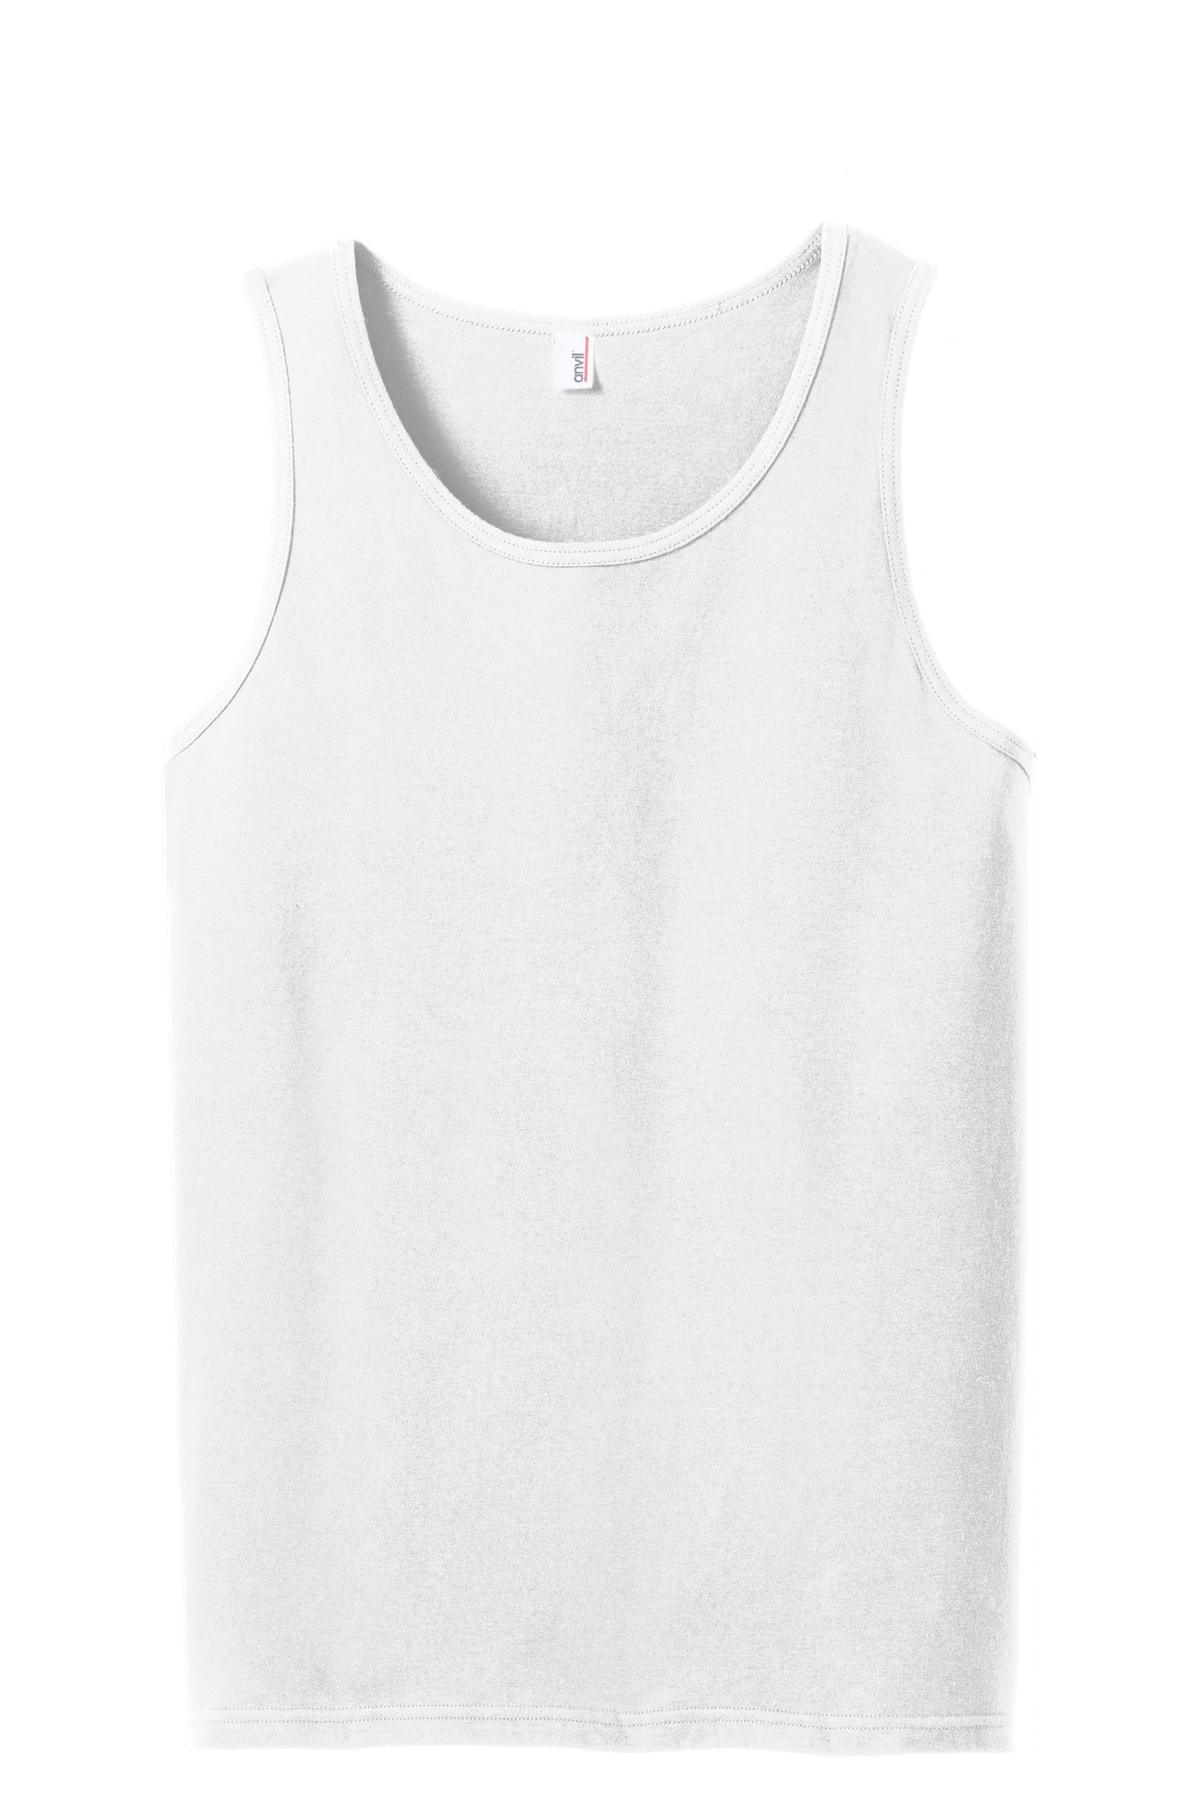 DISCONTINUED Anvil® 100% Combed Ring Spun Cotton Tank Top. 986 - Apparel Globe